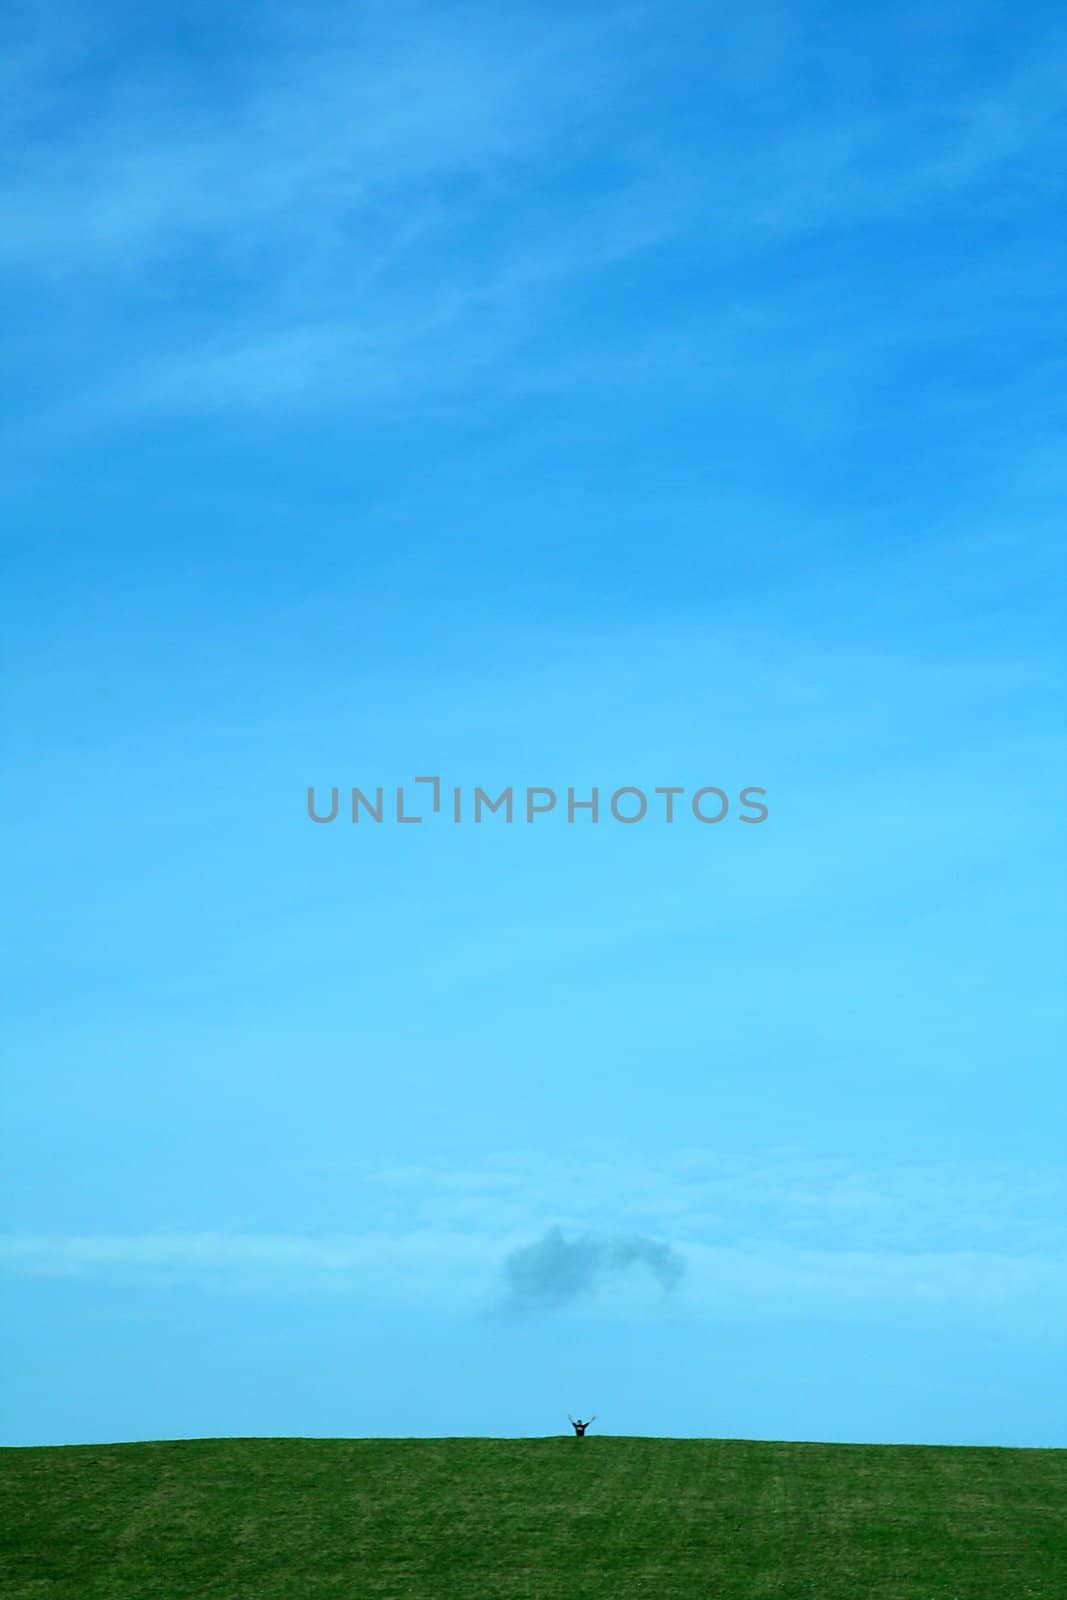 clear blue sky background, small figure in background